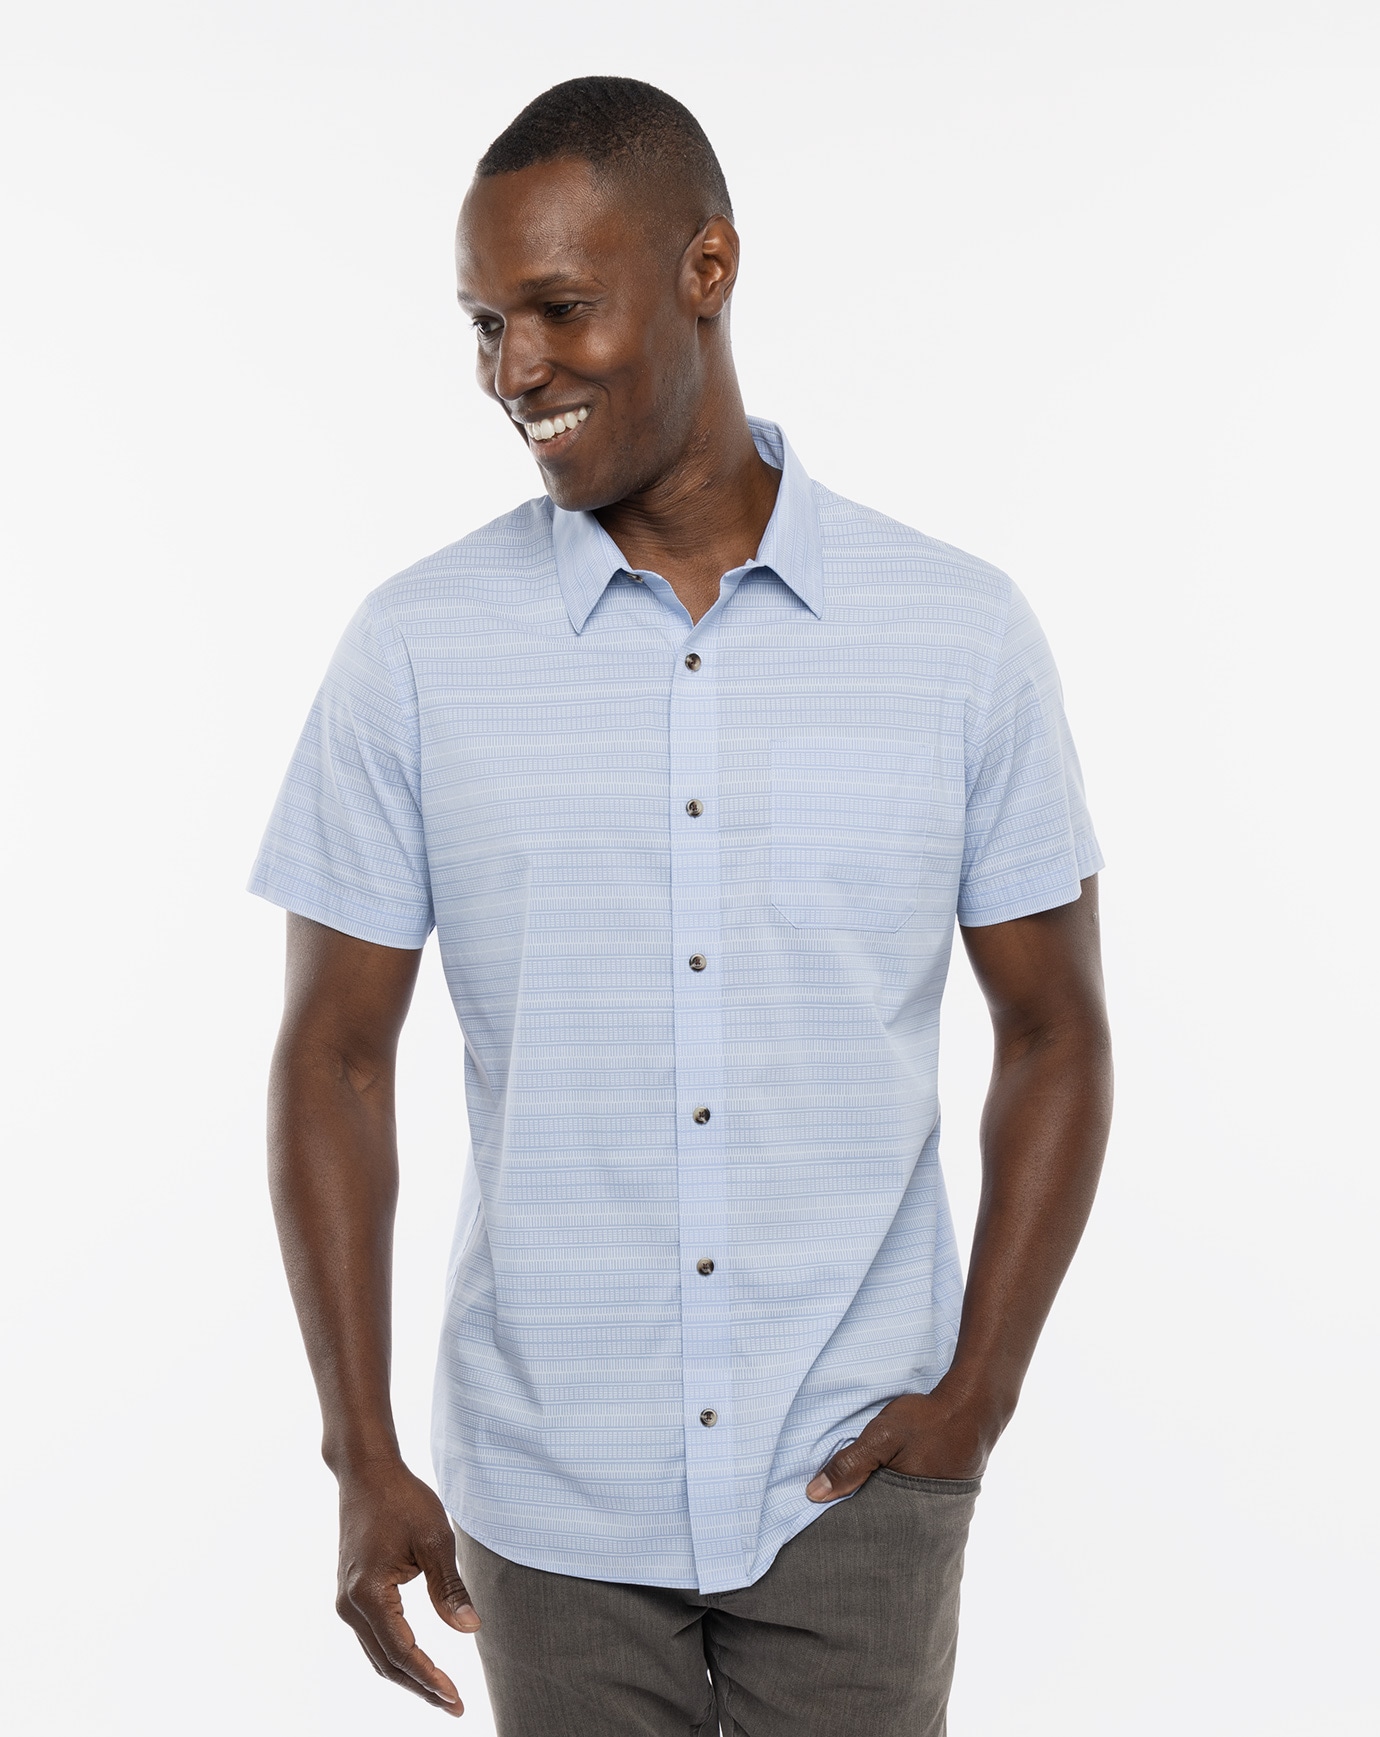 Related Product - PRESIDIO HEIGHTS BUTTON-UP